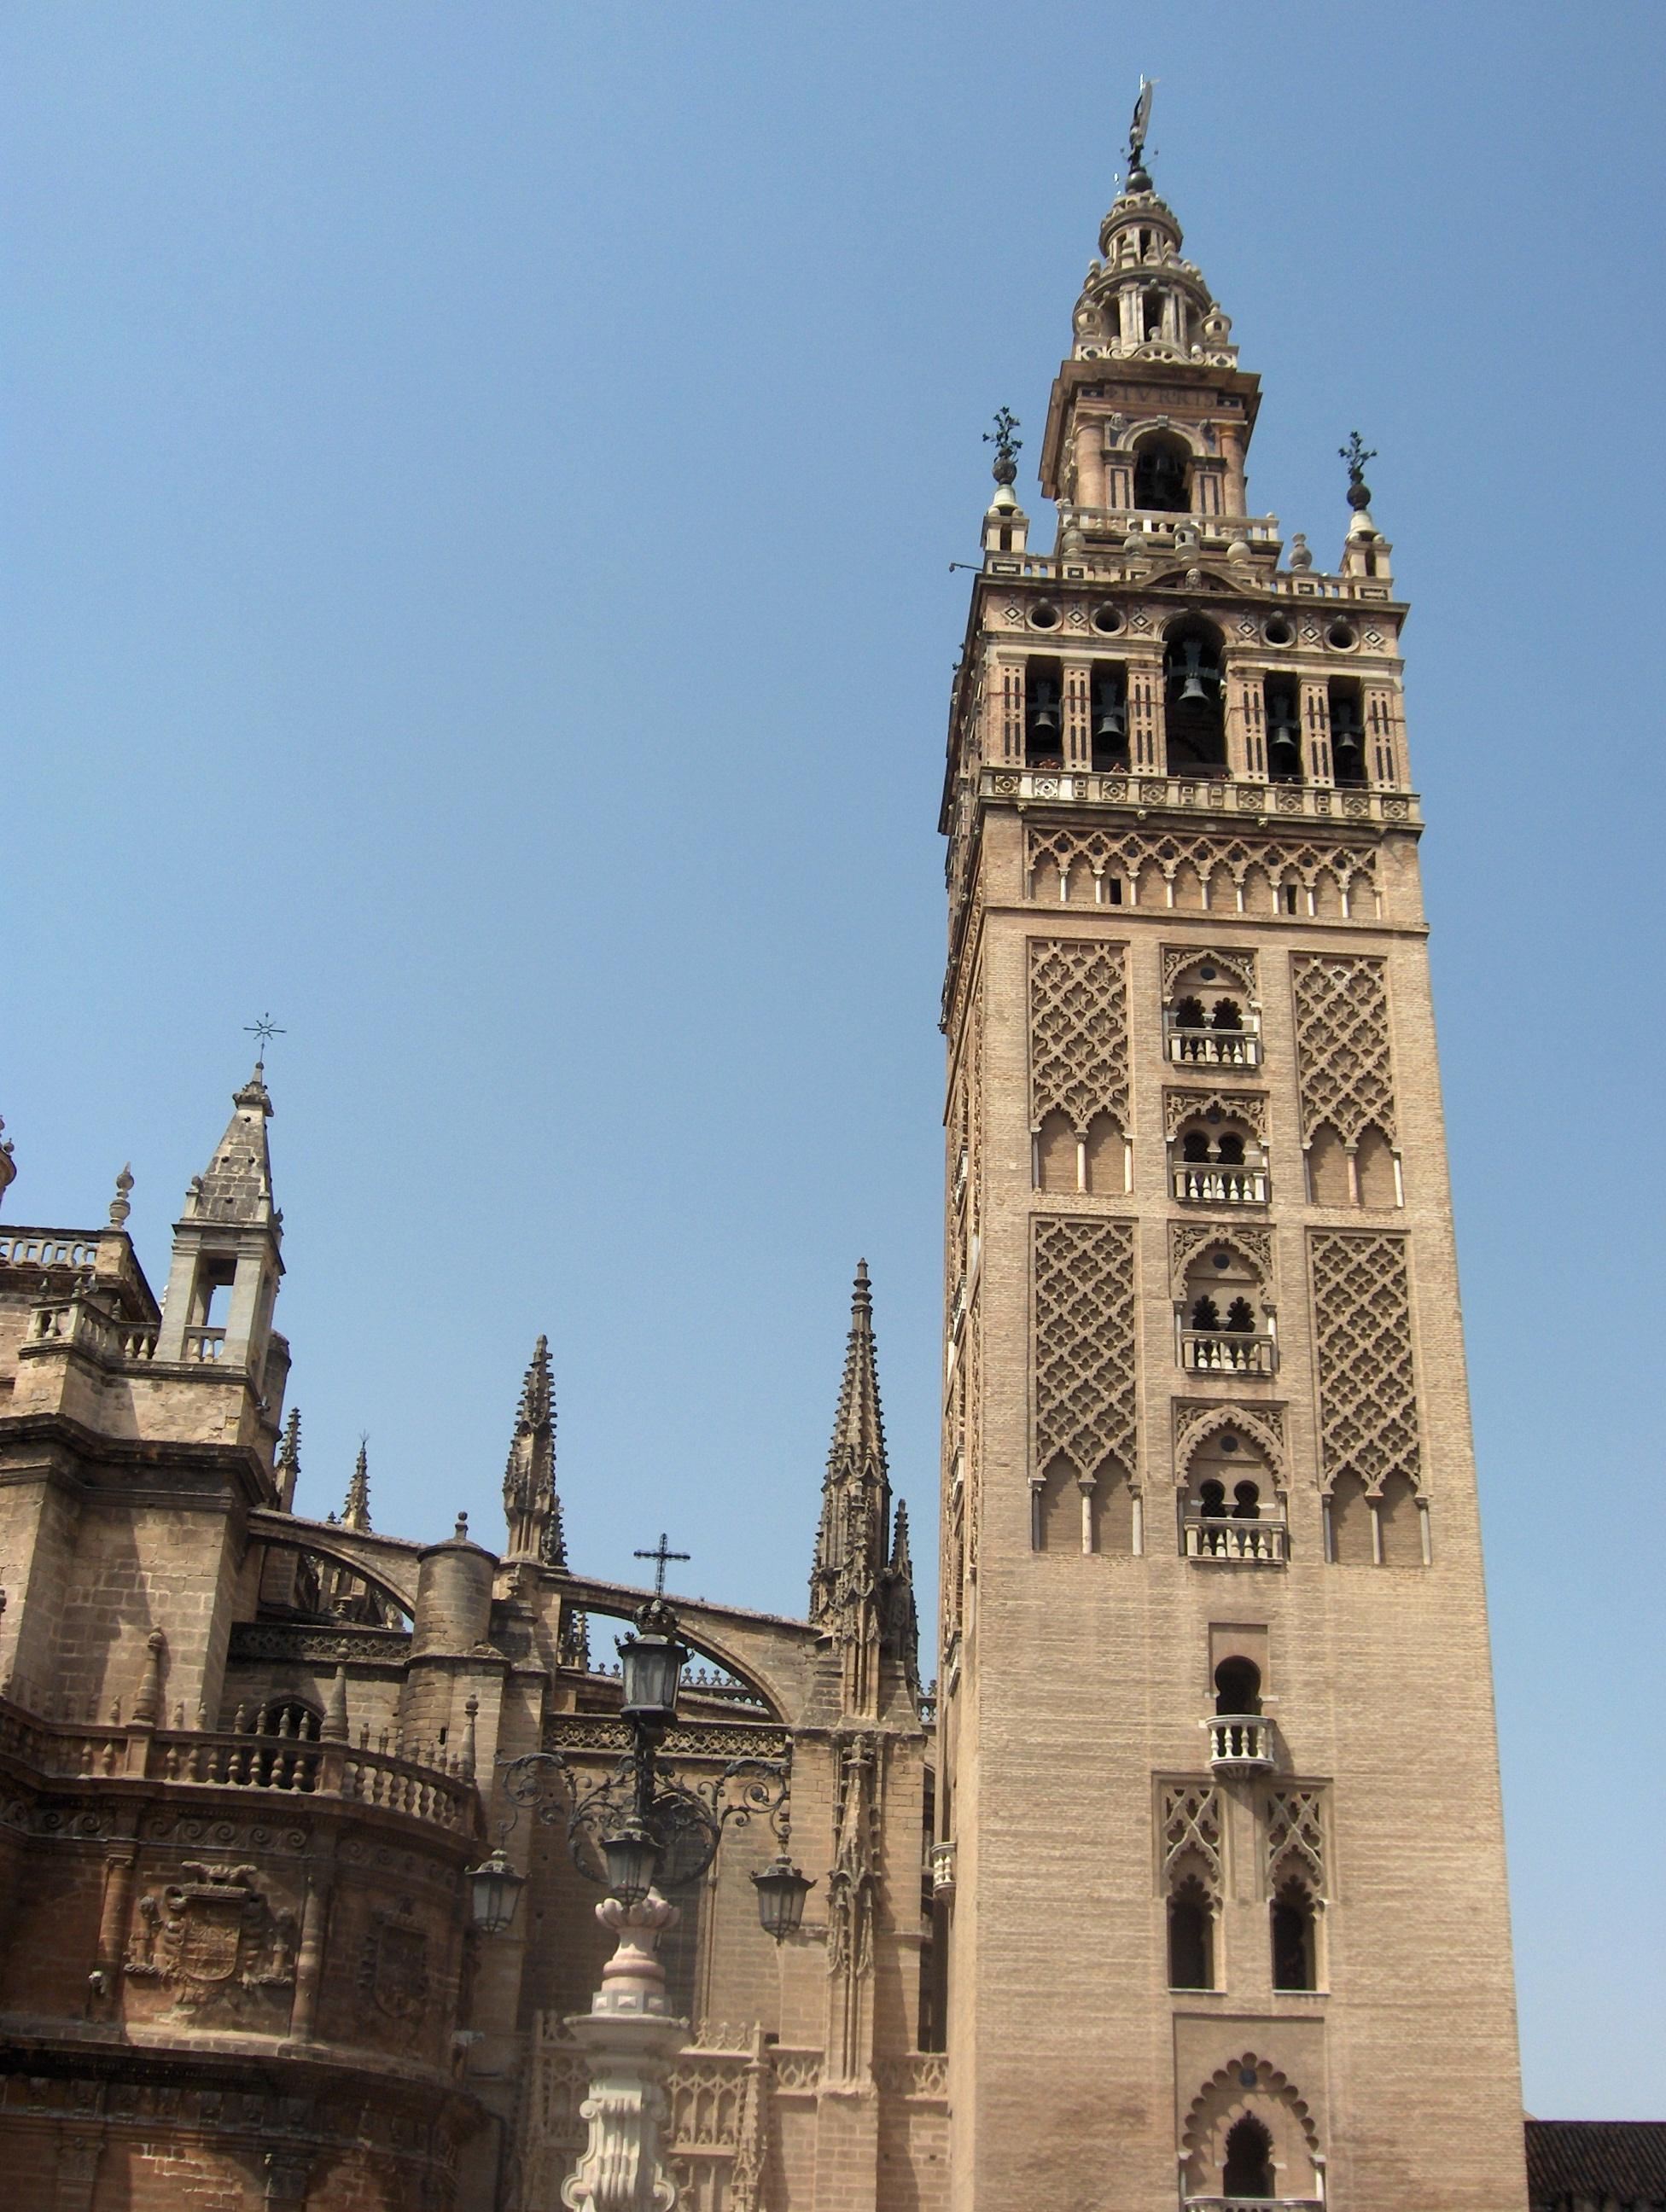 Cover image of this place La Giralda